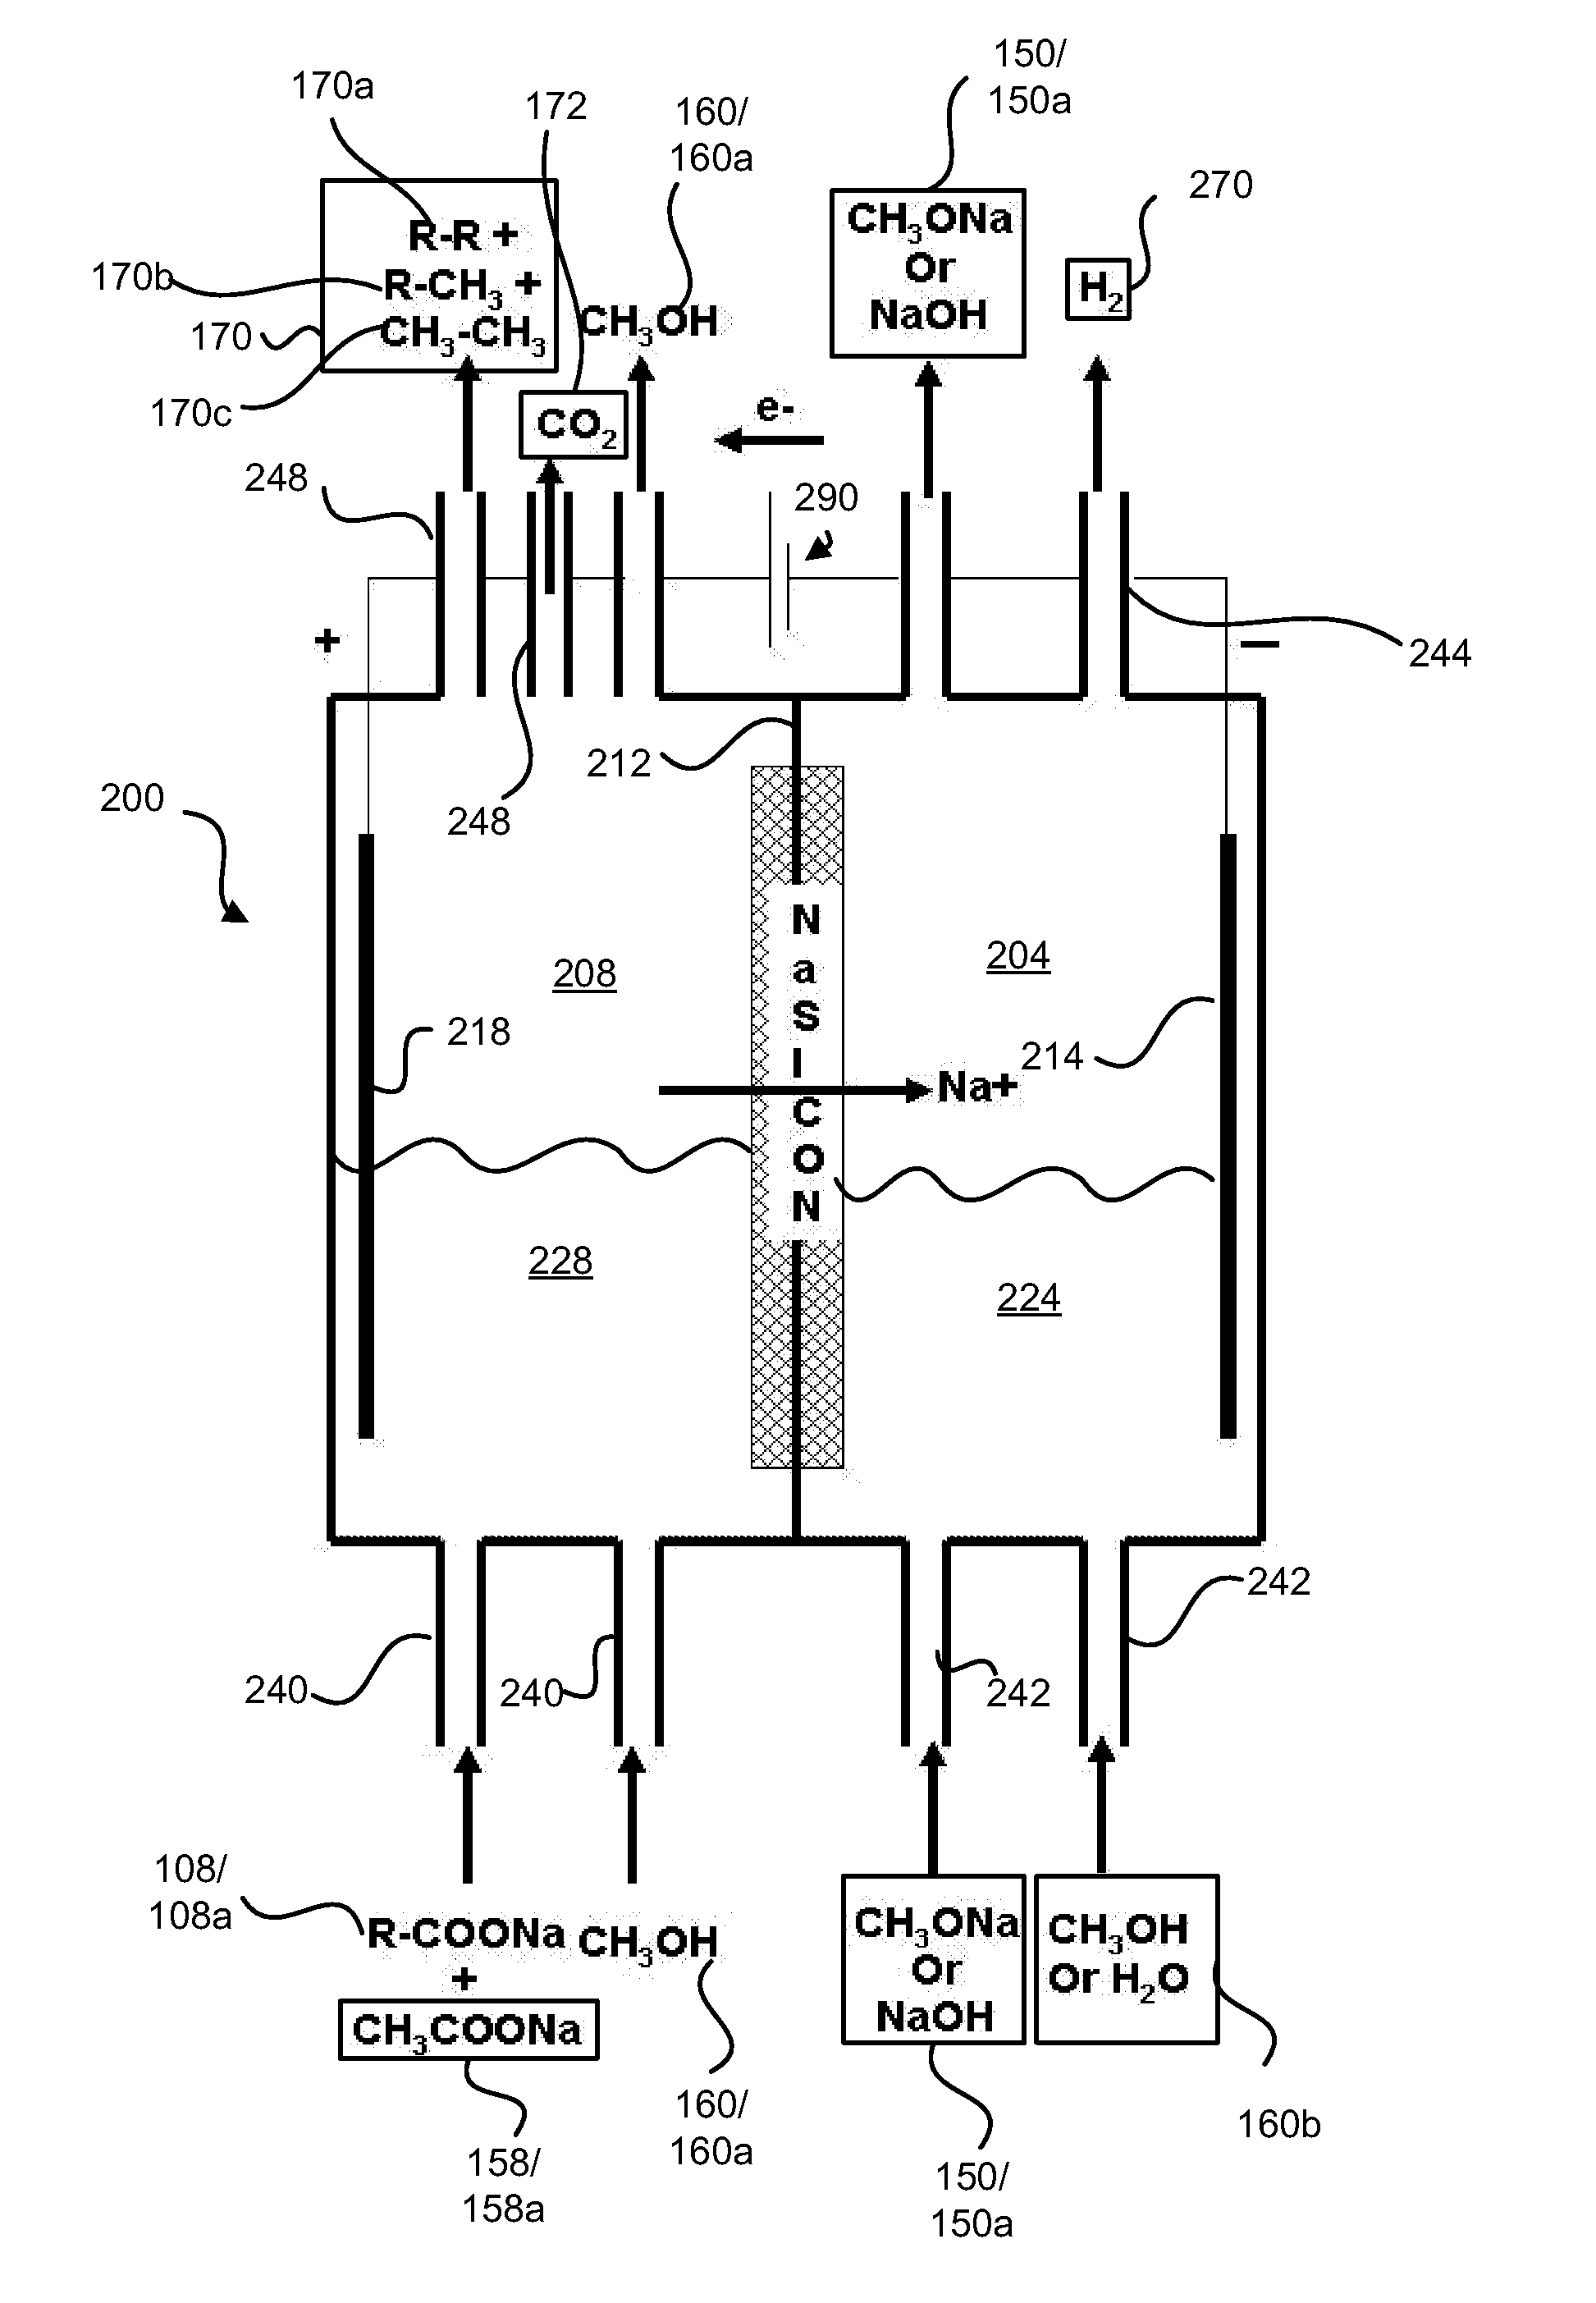 Decarboxylation cell for production of coupled radical products